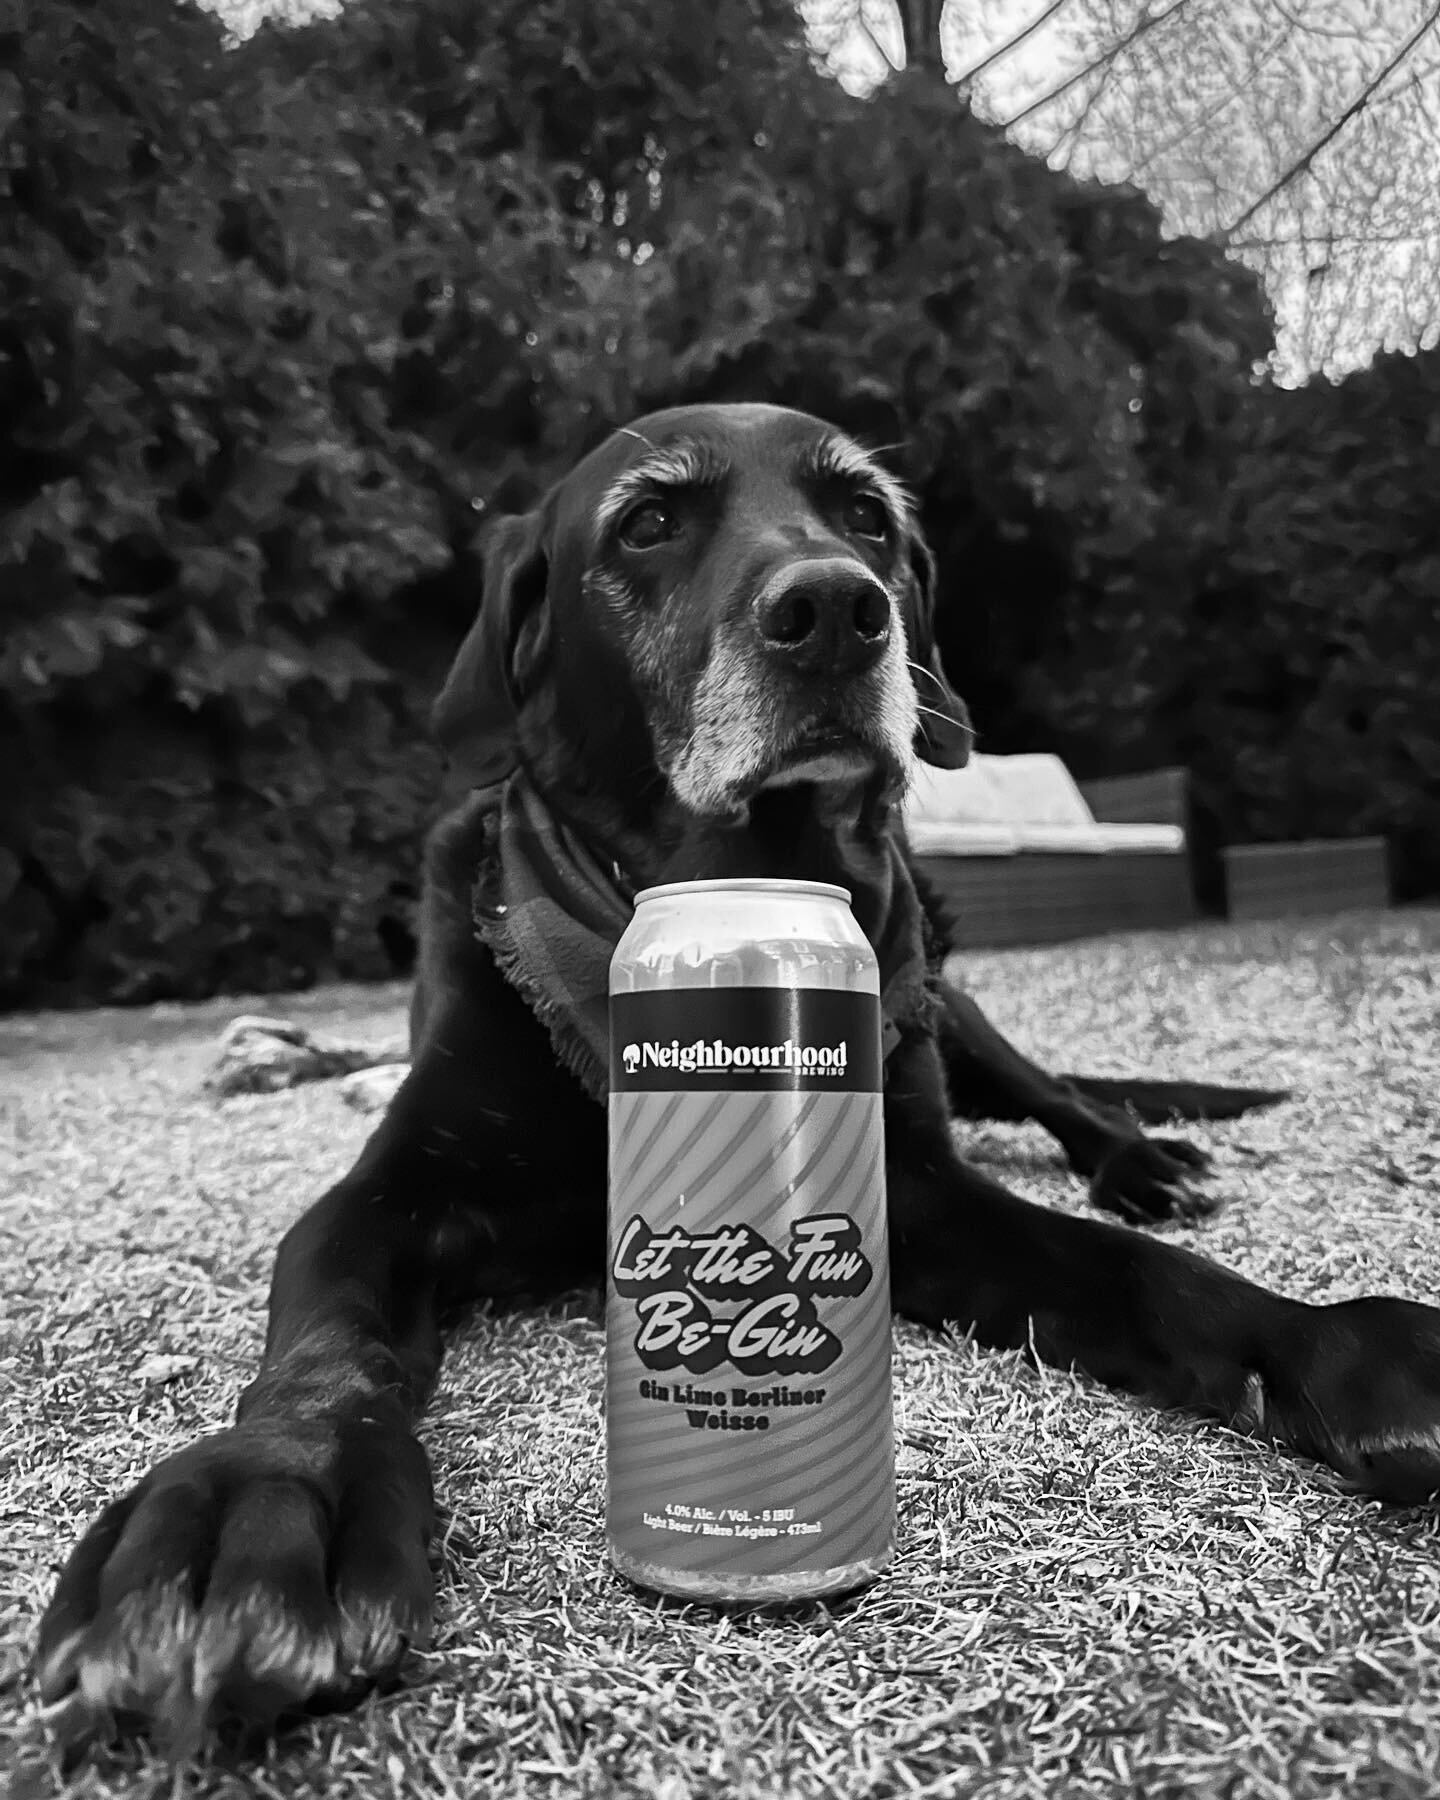 Beer Review Tuesday&hellip;on a Thursday!🍻
Eddie has been enjoying a busy couple of weeks on the road and he gently reminded us we missed our beer review! 🐶 
So he picked up this delicious brew from @nbhdbeer while he was in Penticton!
🍸Let the Fu